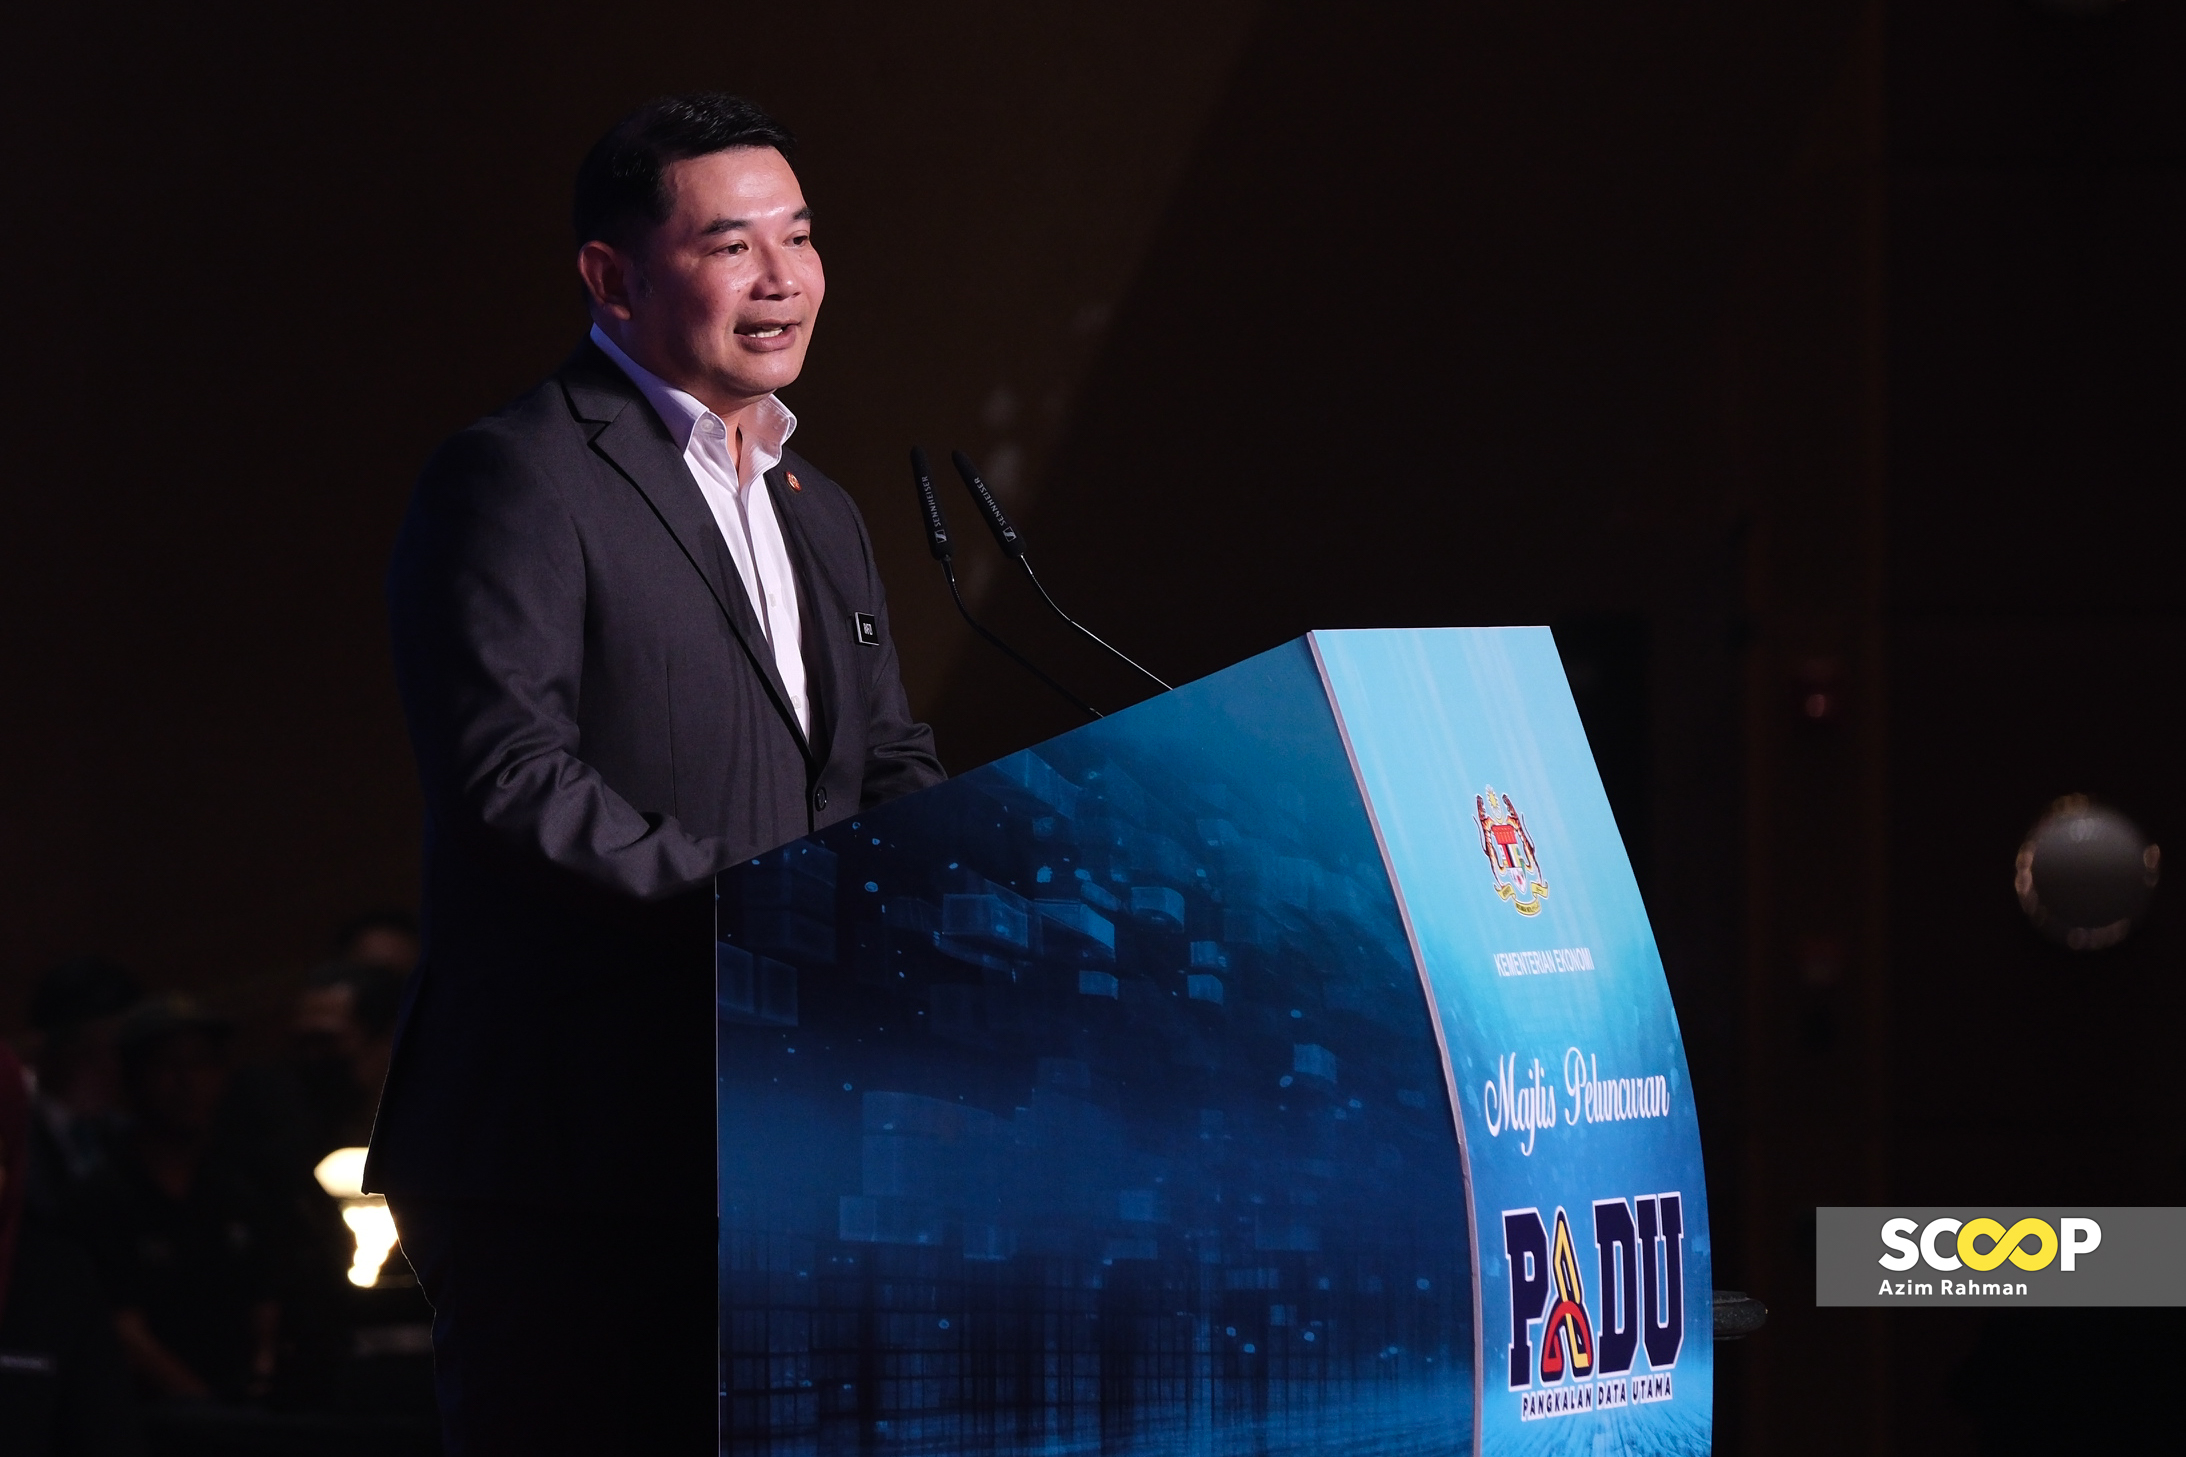 Padu’s March 31 deadline important for targeted subsidy implementation: Rafizi